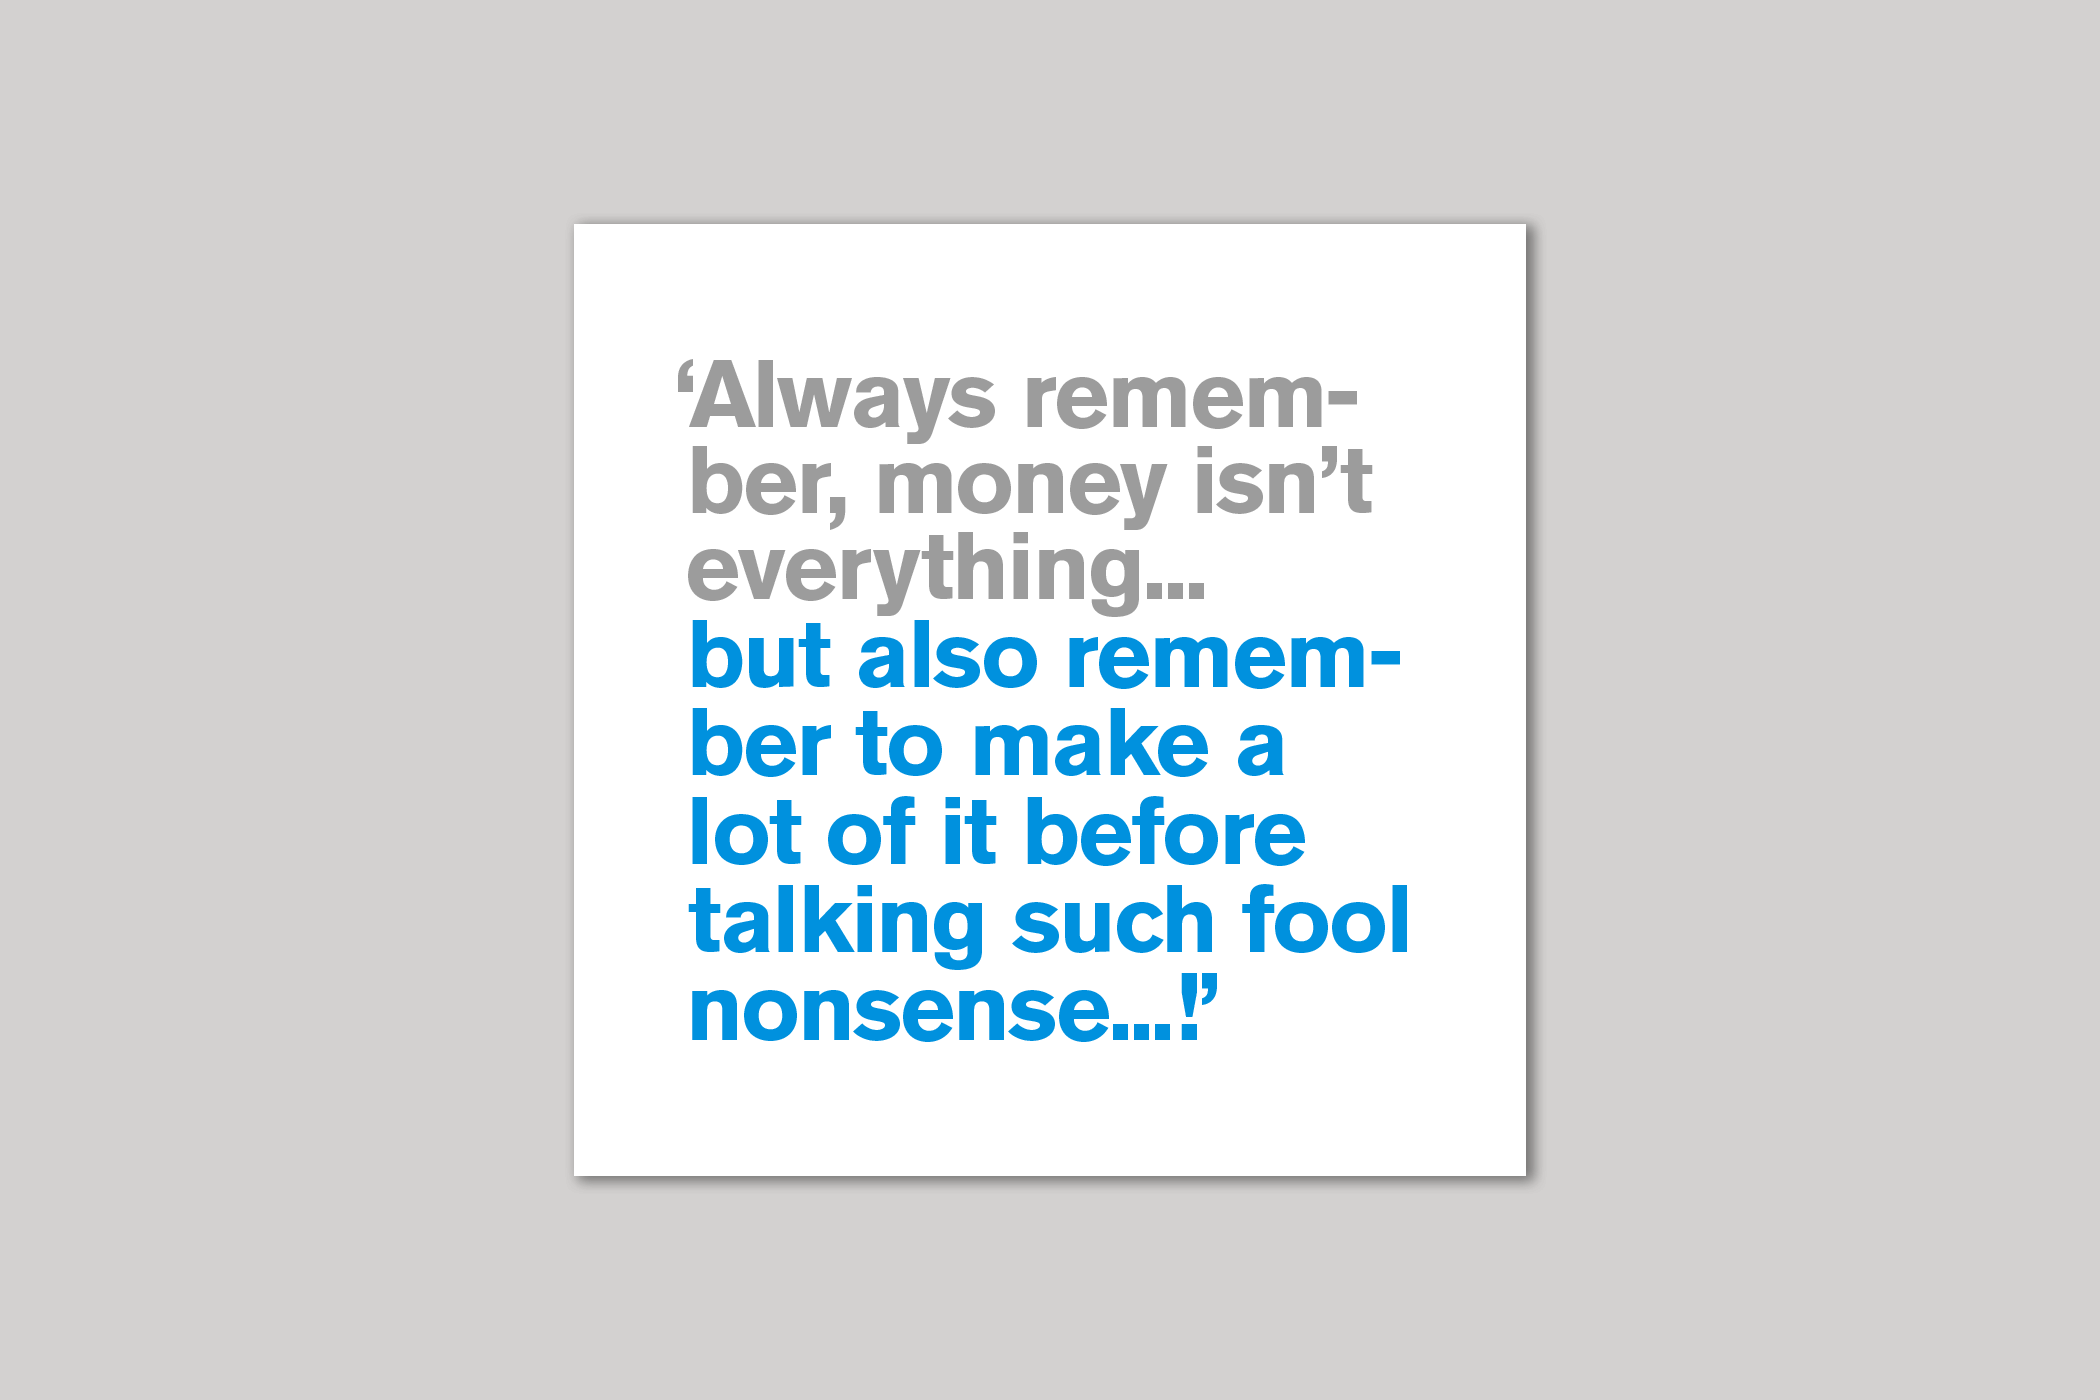 Money Isn't Everything from Lyric range of quotation cards by Icon.